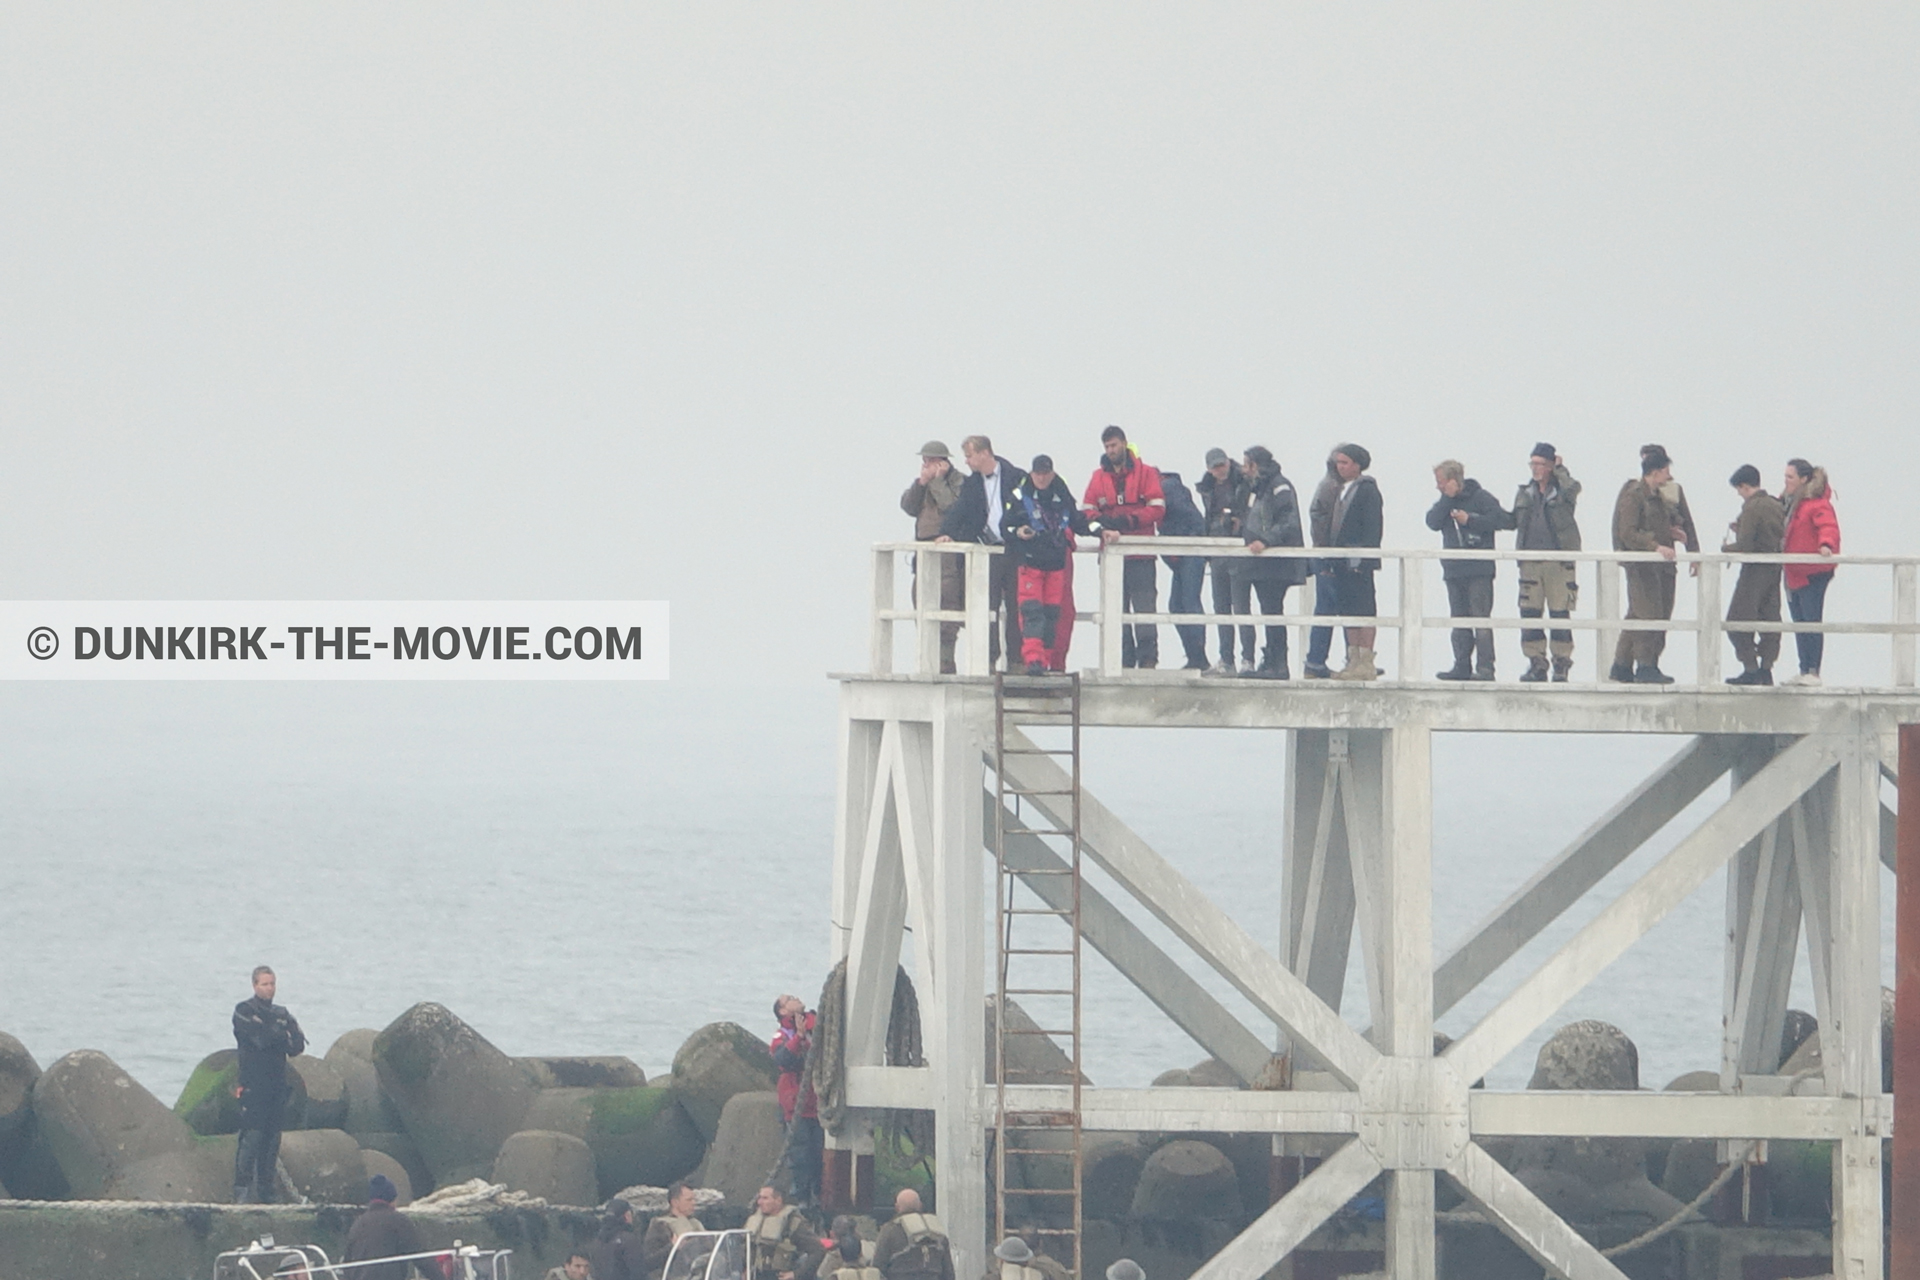 Picture with actor, grey sky, supernumeraries, Hoyte van Hoytema, EST pier, Christopher Nolan, inflatable dinghy,  from behind the scene of the Dunkirk movie by Nolan